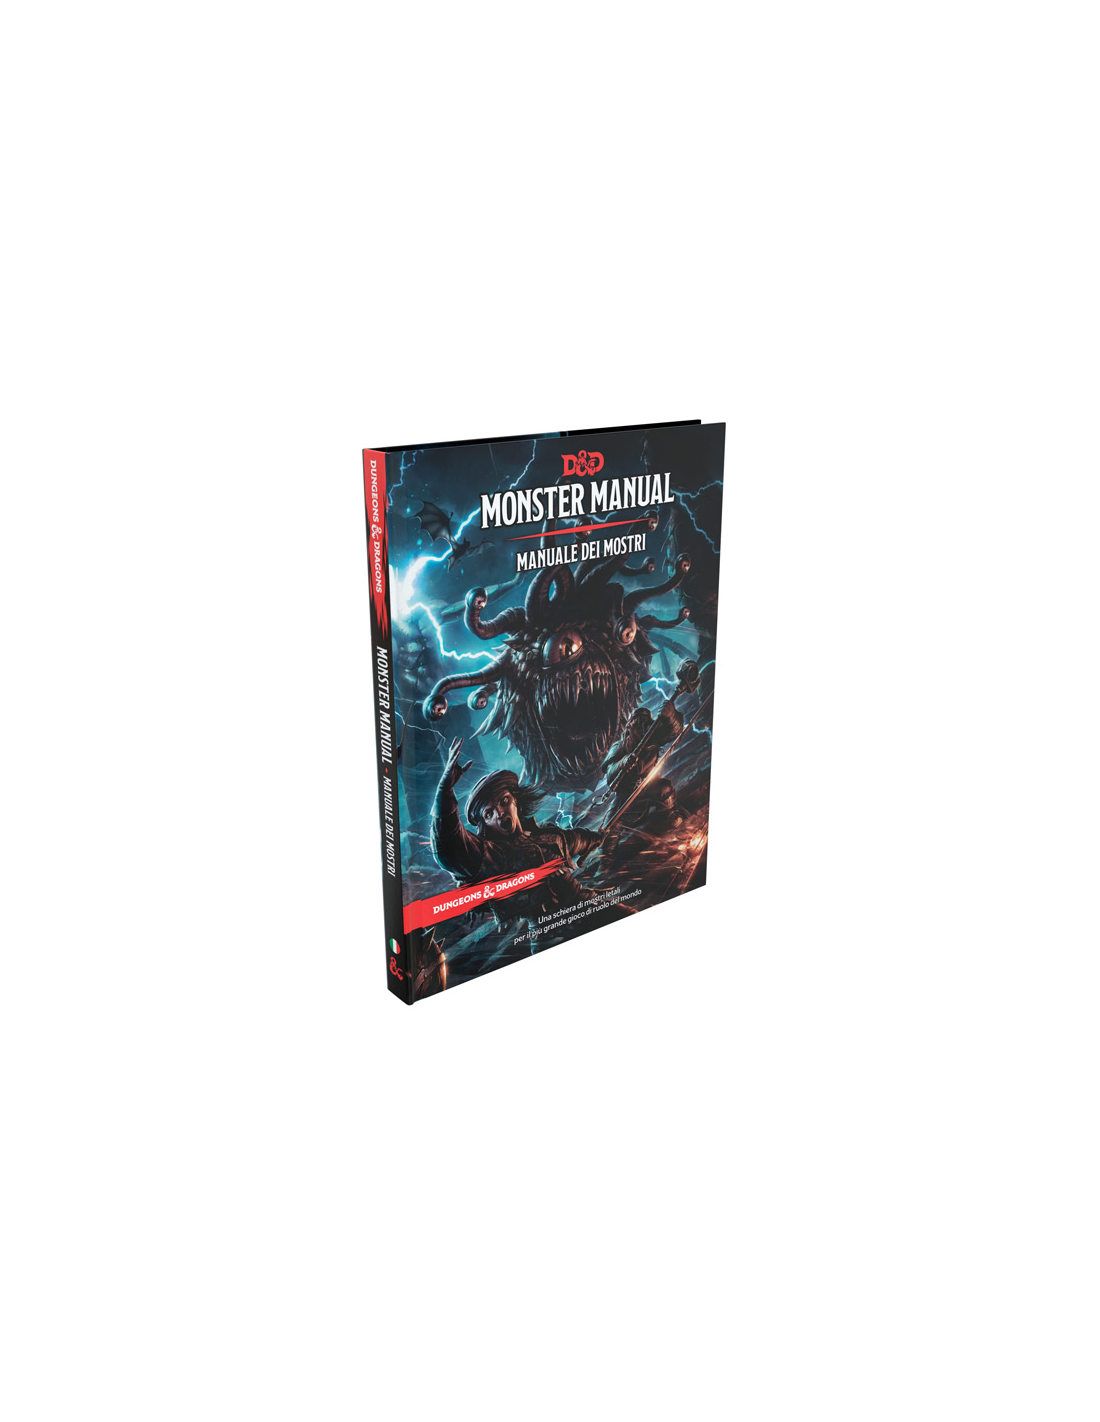 D&D Italian Monster Manual Manuale dei Mostri 6004 Dungeons & Dragons D20  NEW HC